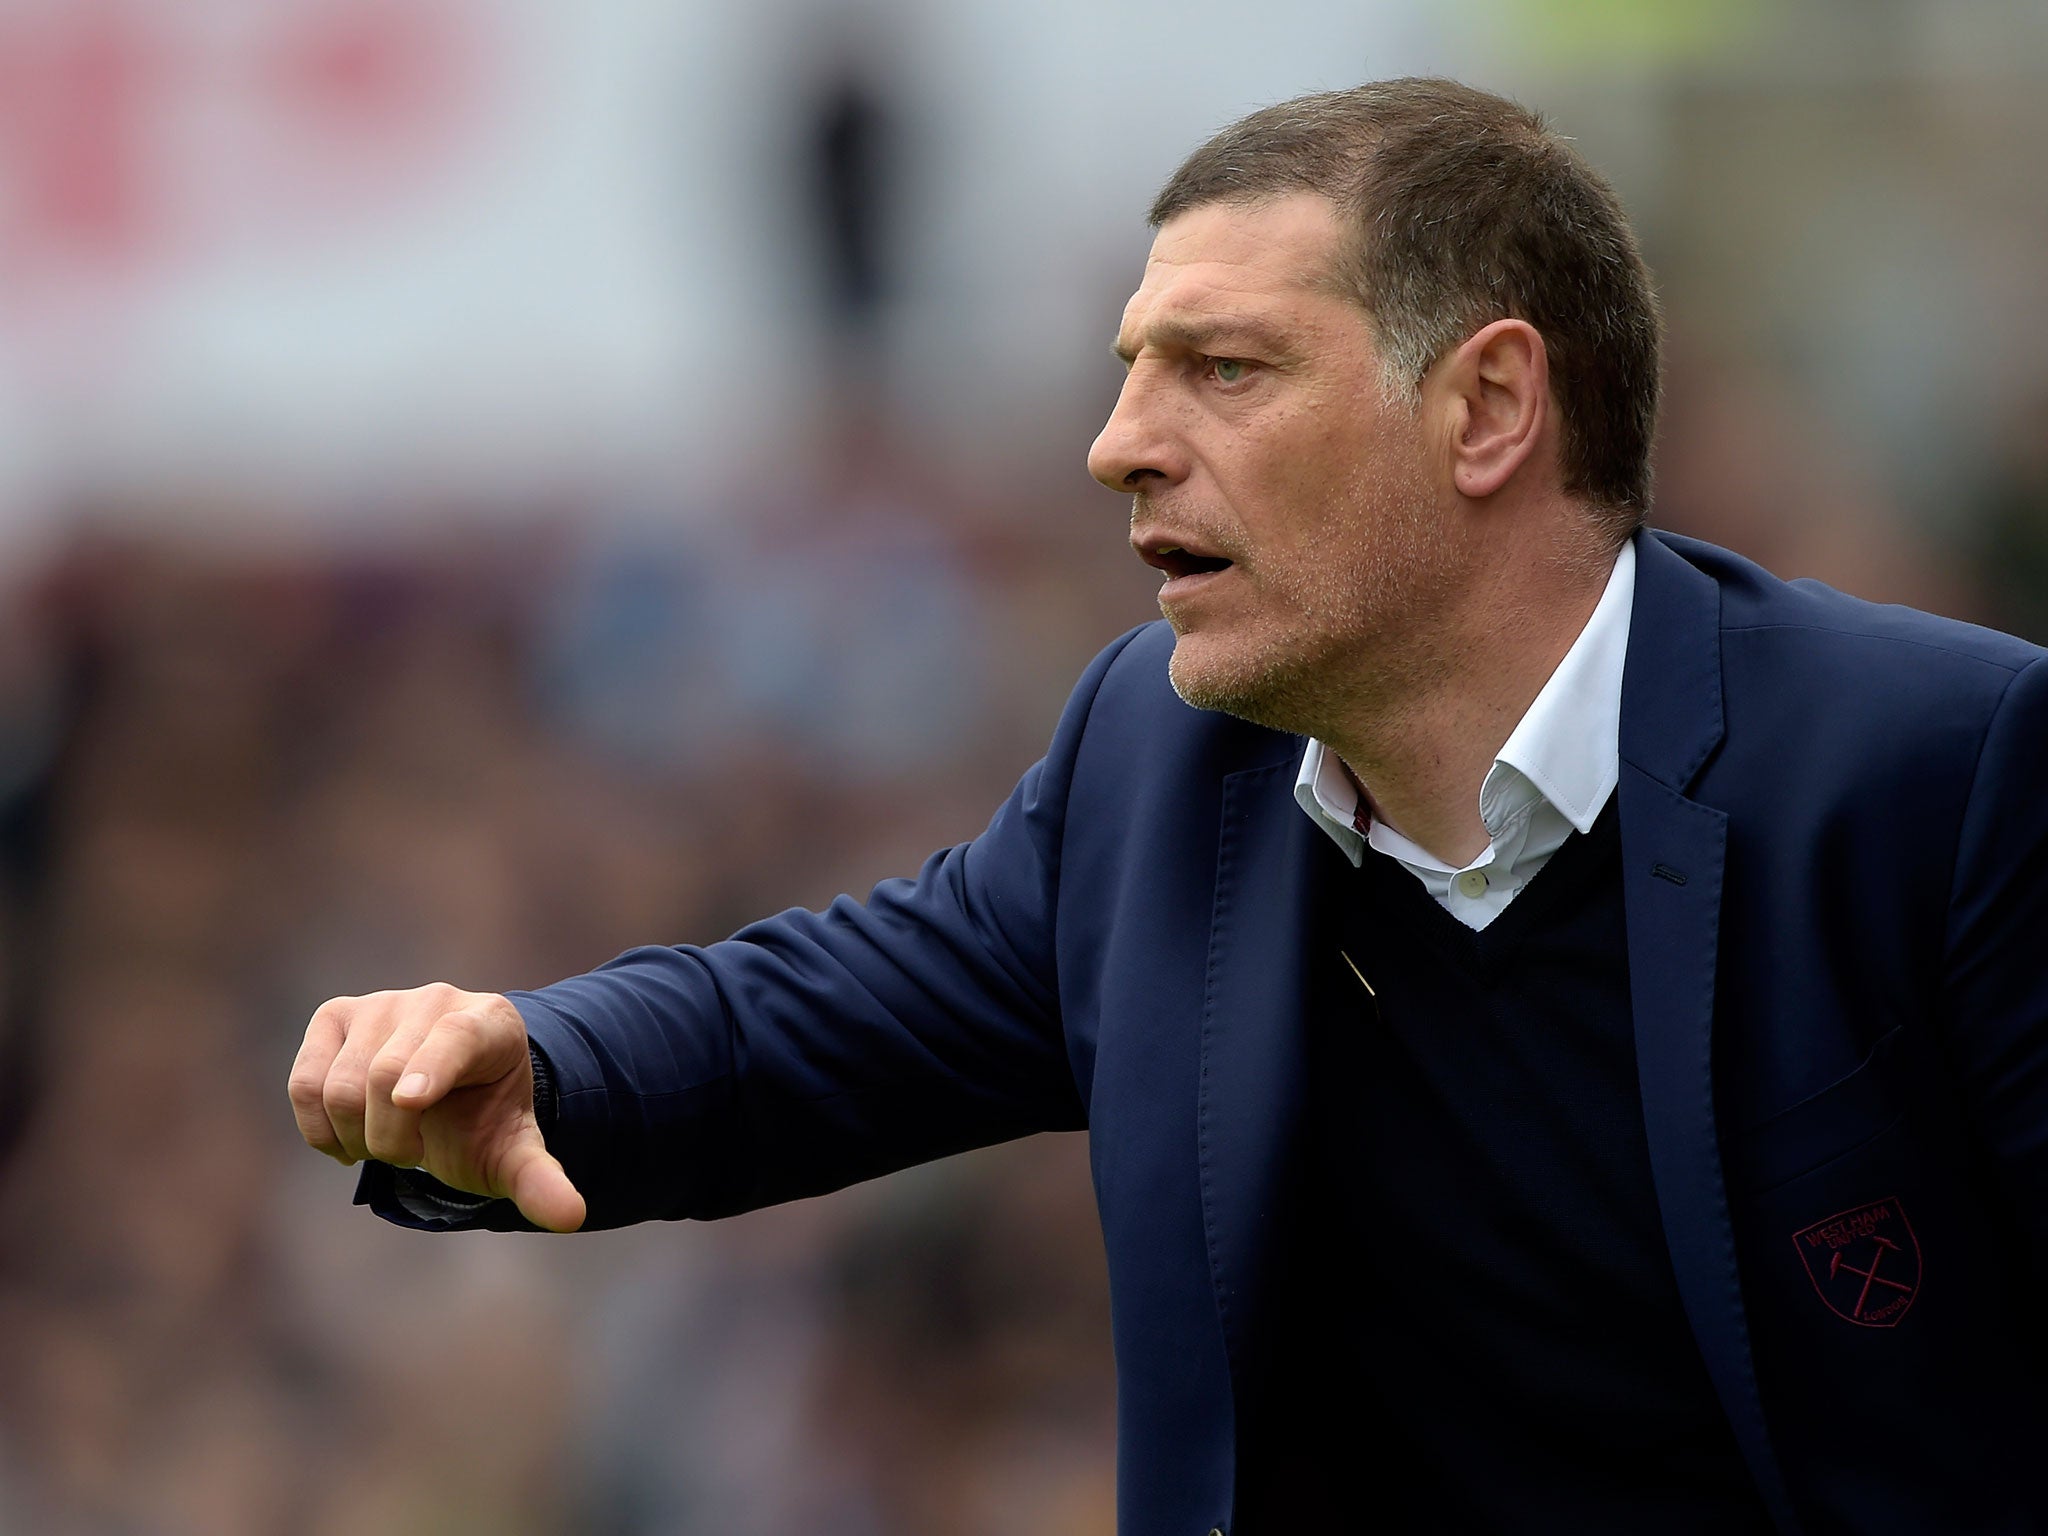 &#13;
The pressure is on for West Ham boss Slaven Bilic &#13;